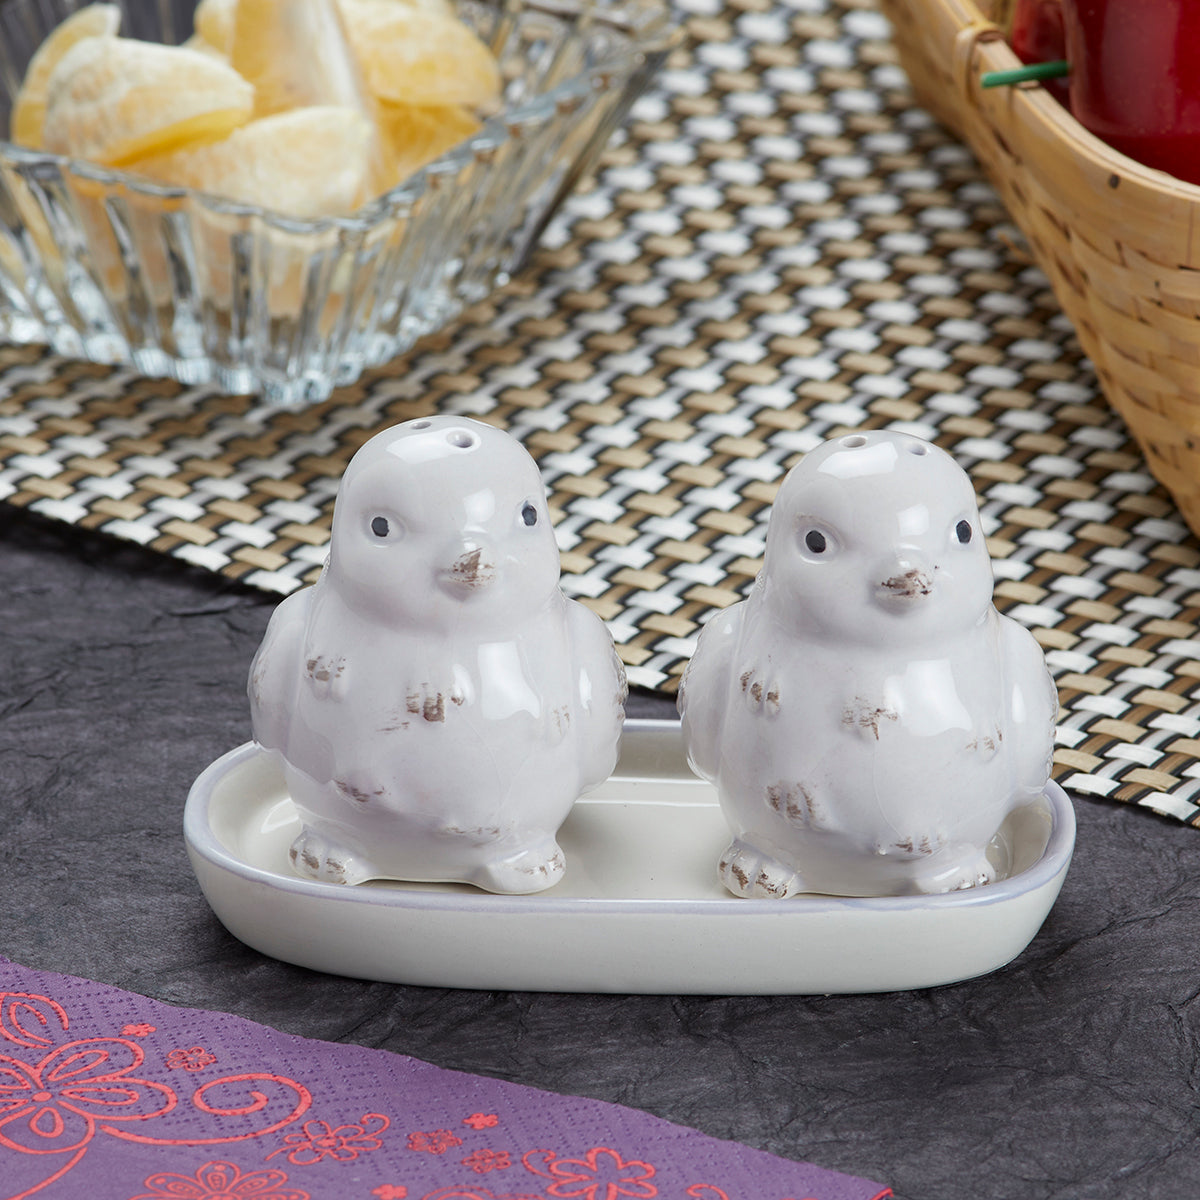 Ceramic Salt Pepper Container Set with tray for Dining Table (9975)